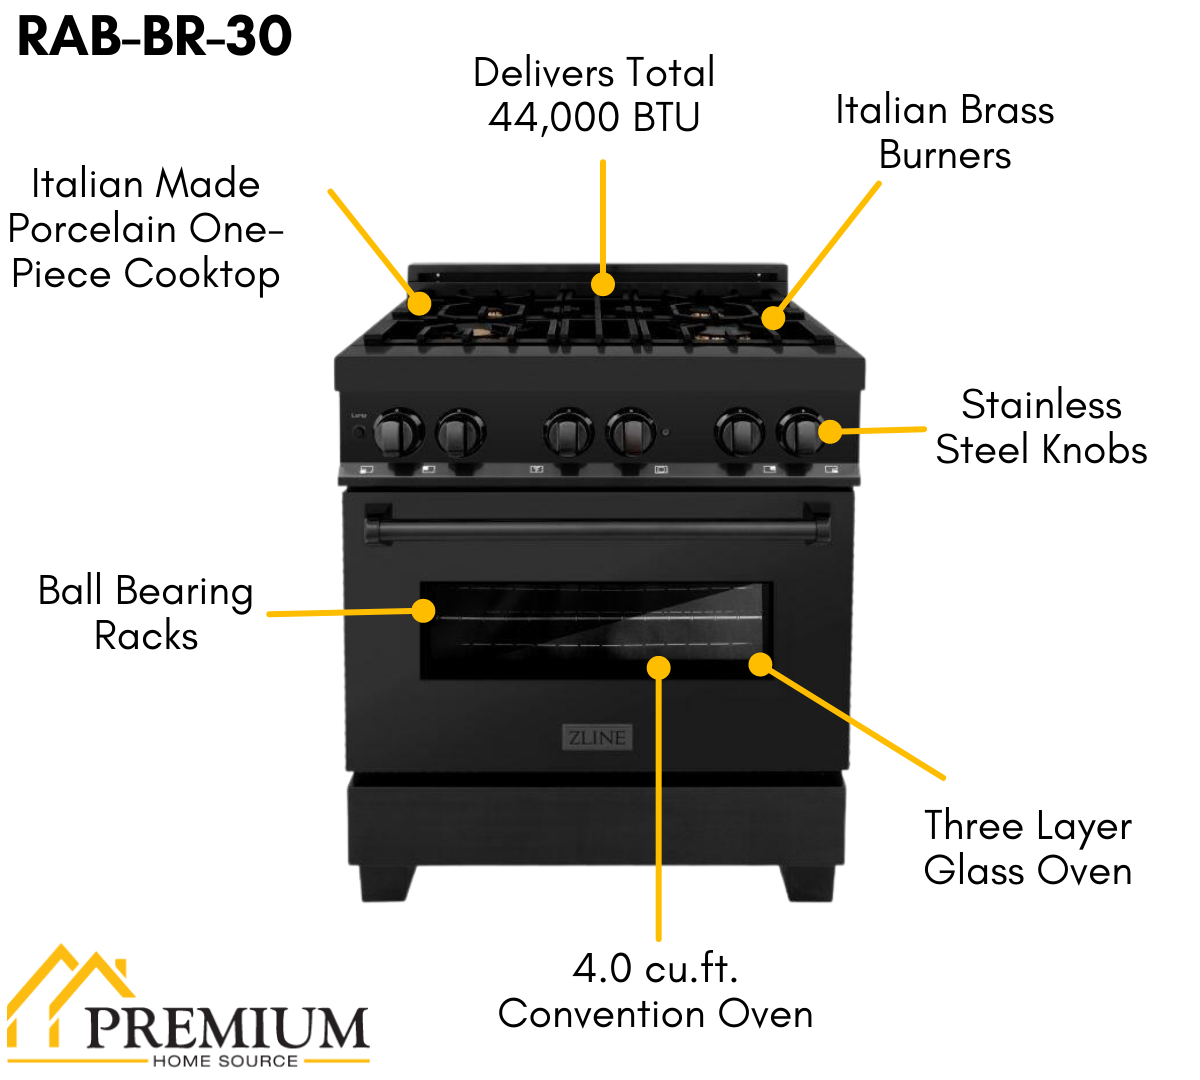 ZLINE Kitchen Package with Black Stainless Steel Refrigeration, 30" Dual Fuel Range and 30" Traditional Over the Range Microwave